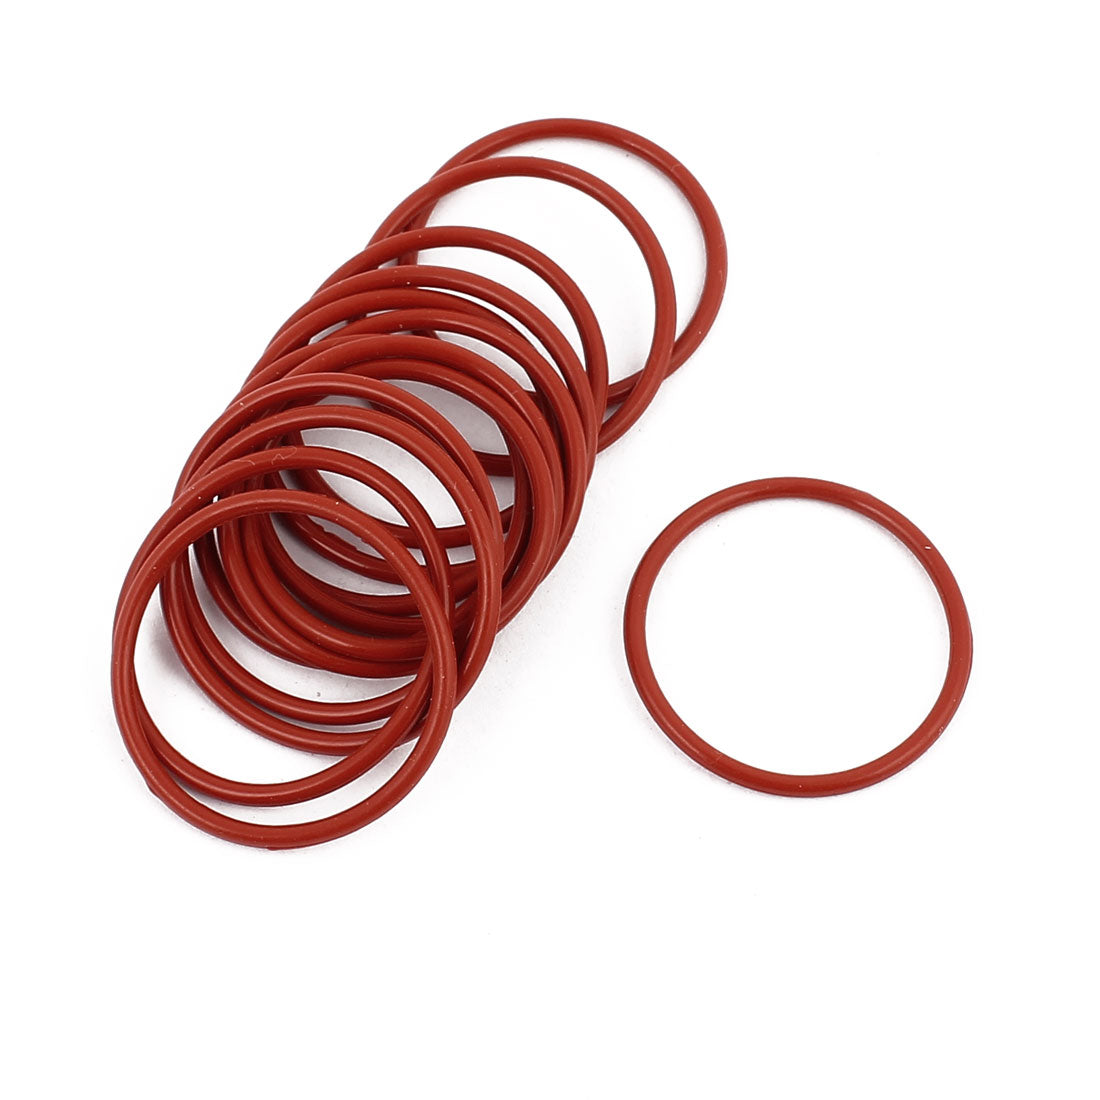 uxcell Uxcell 20Pcs 24mm x 1.5mm Rubber O-rings NBR Heat Resistant Sealing Ring Grommets Red